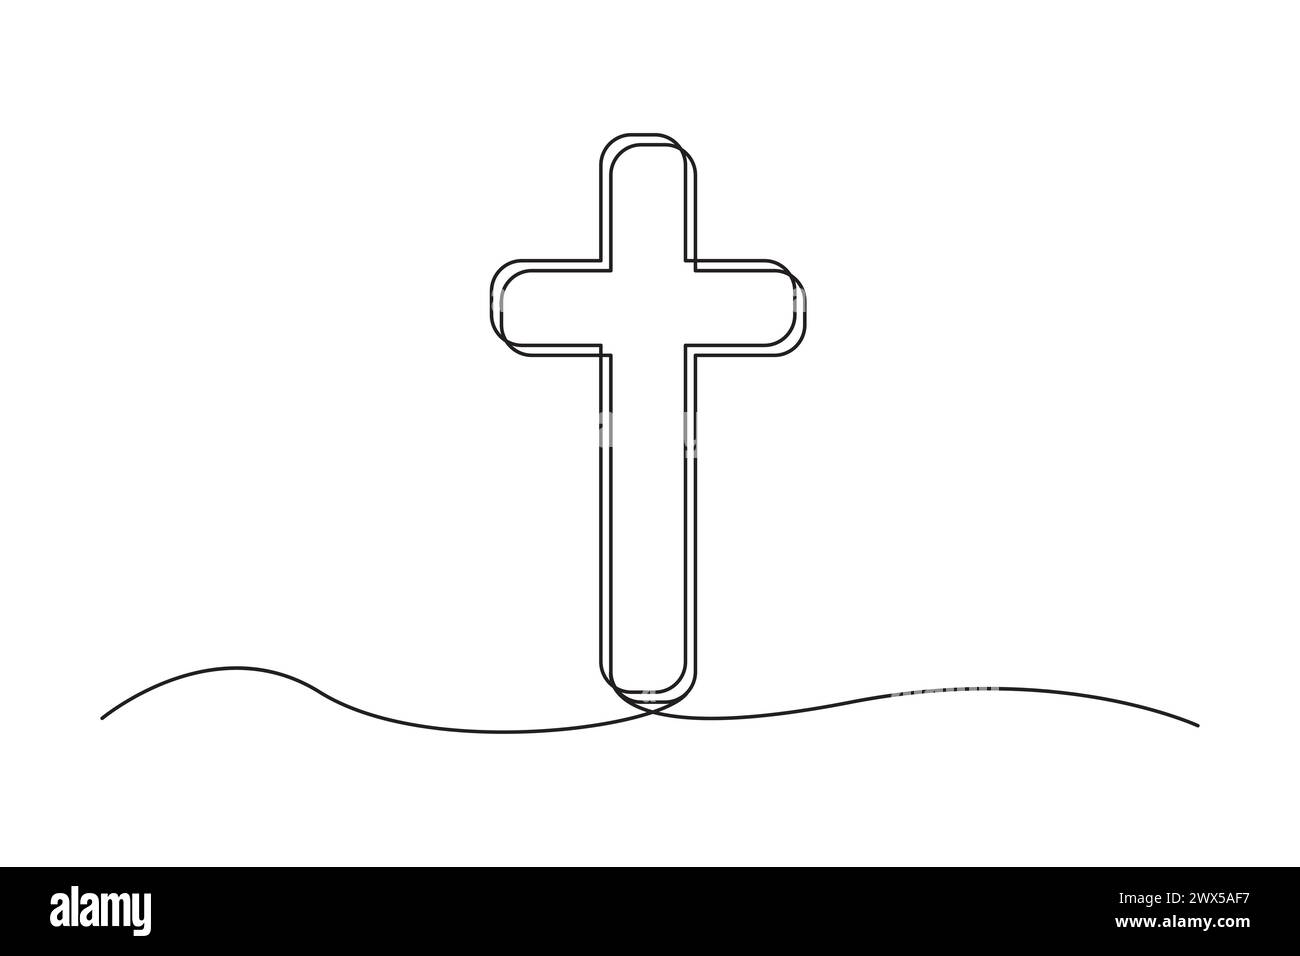 One line Christian cross design. Minimalist religious symbol. Continuous line drawing. Vector illustration. EPS 10. Stock Vector